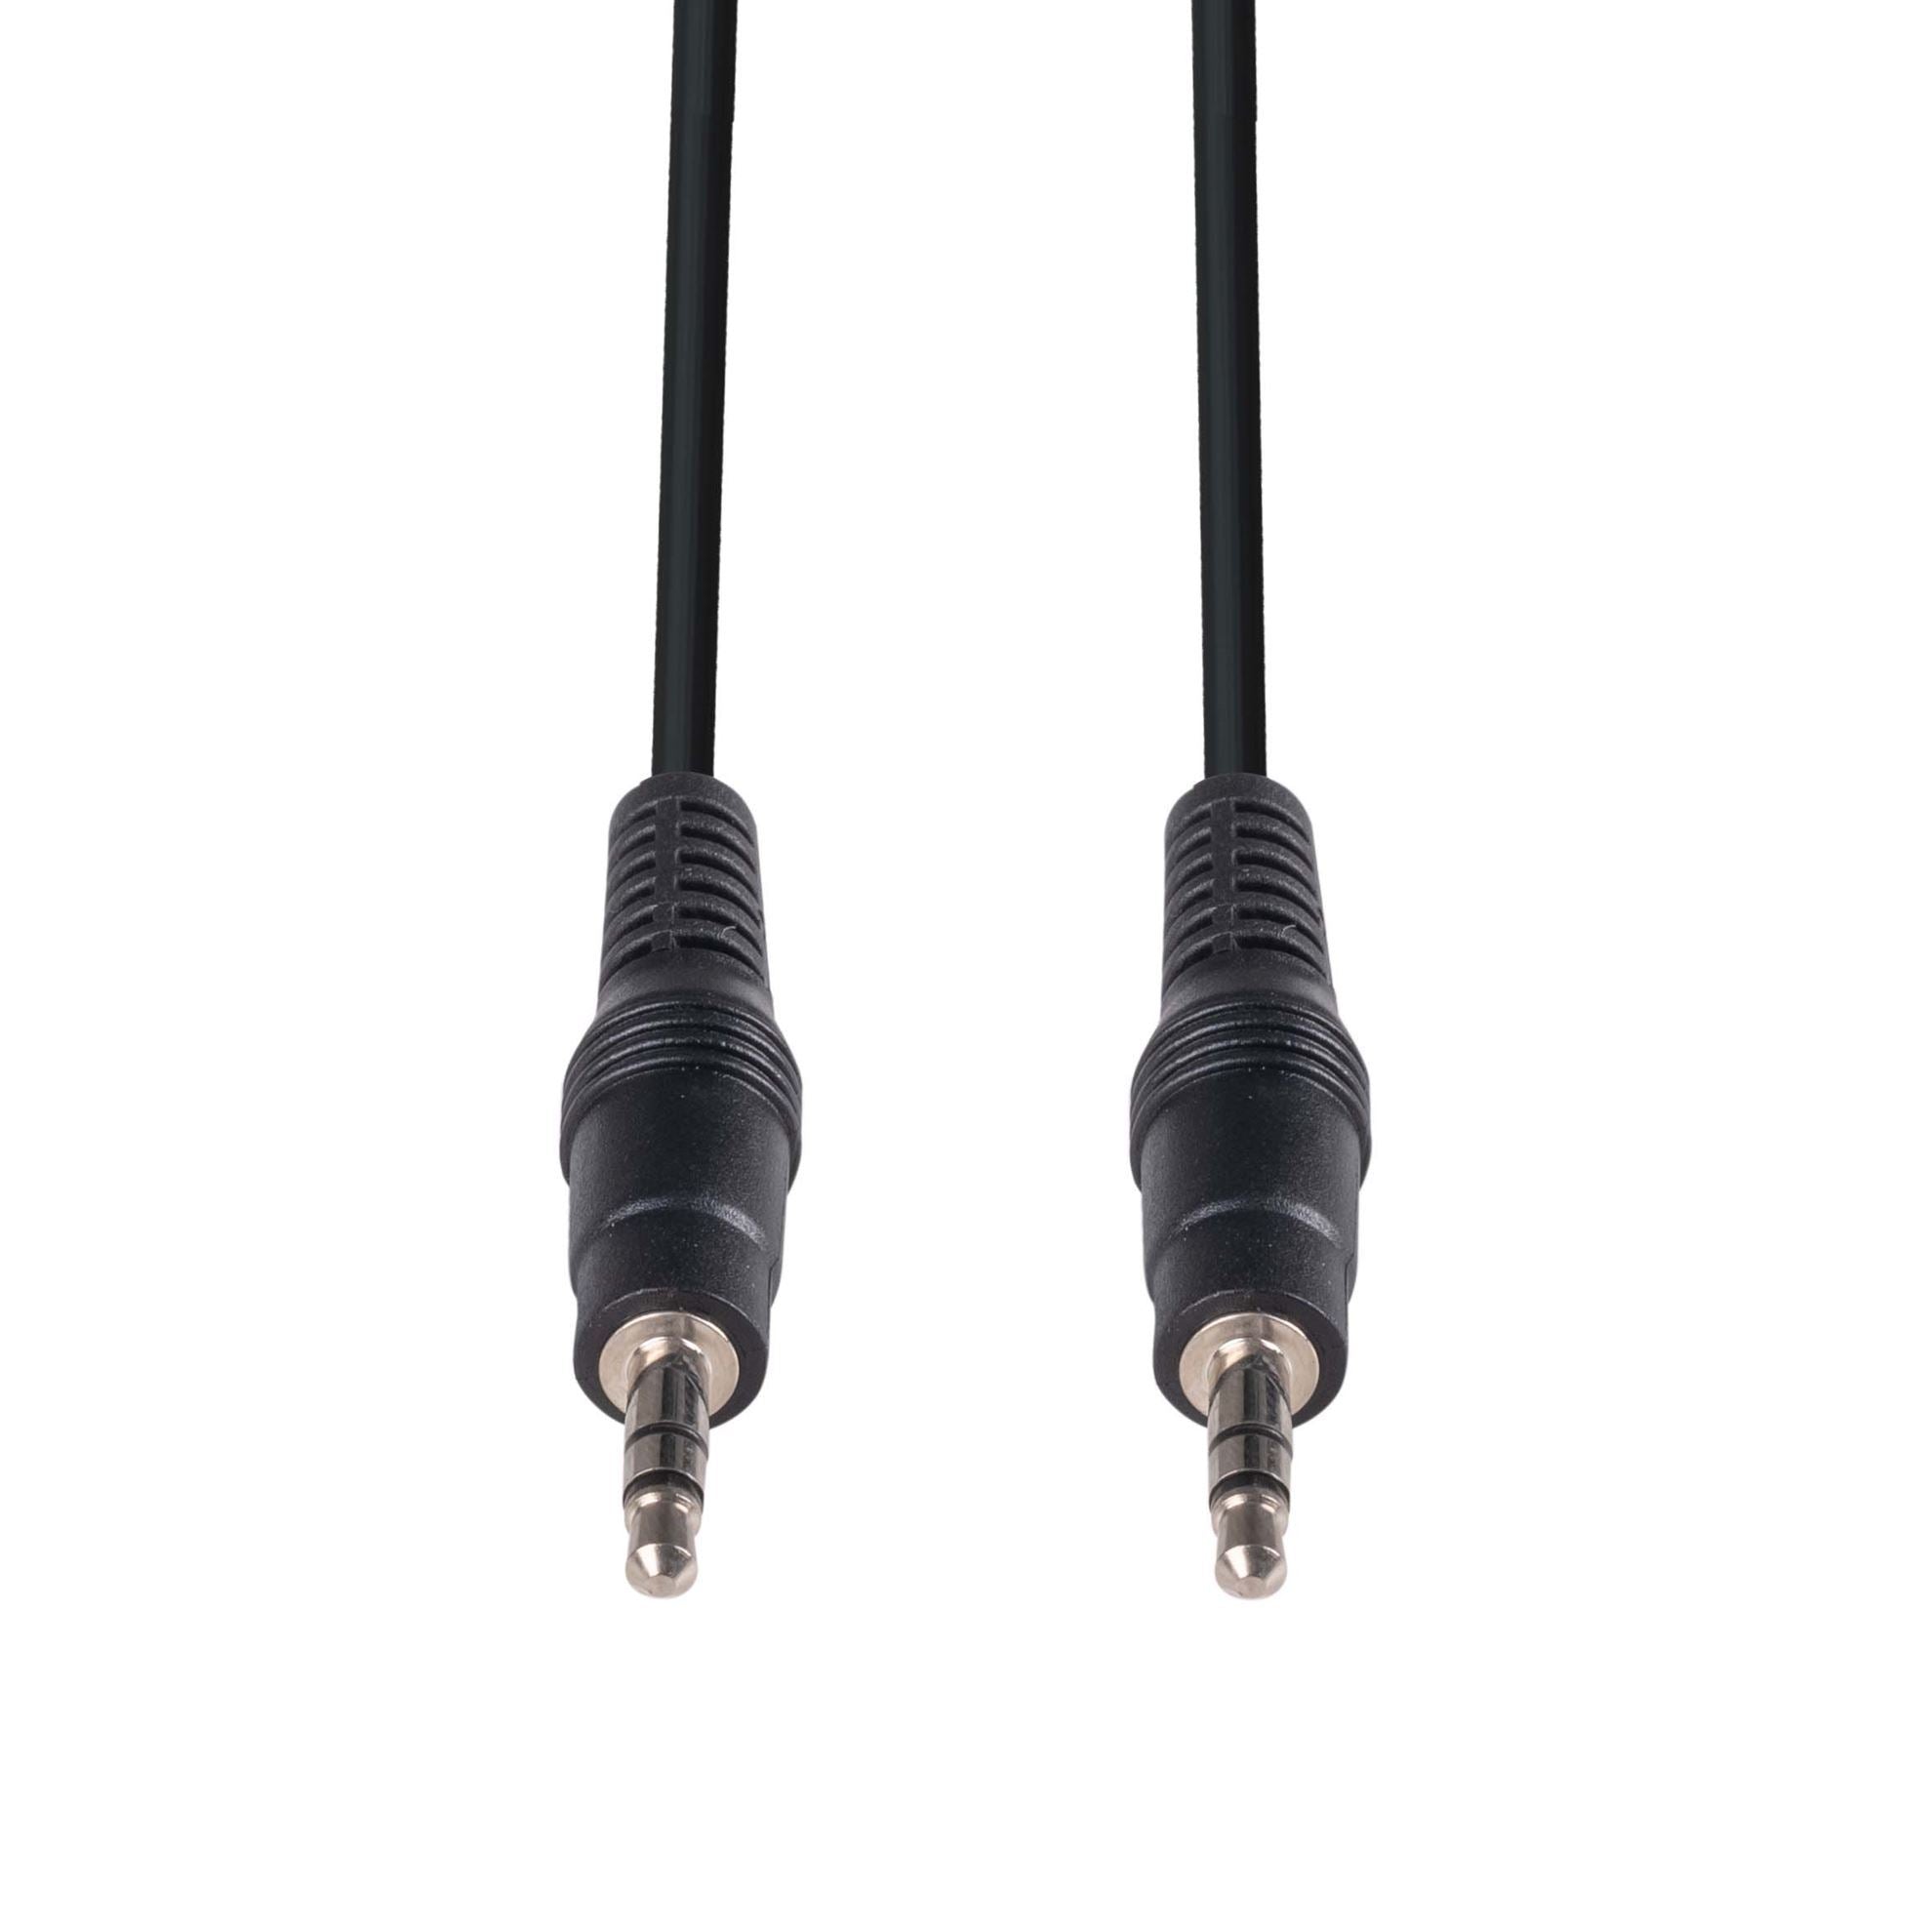 DYNAMIX_2M_Stereo_3.5mm_Plug_Male_to_Male_Cable 484